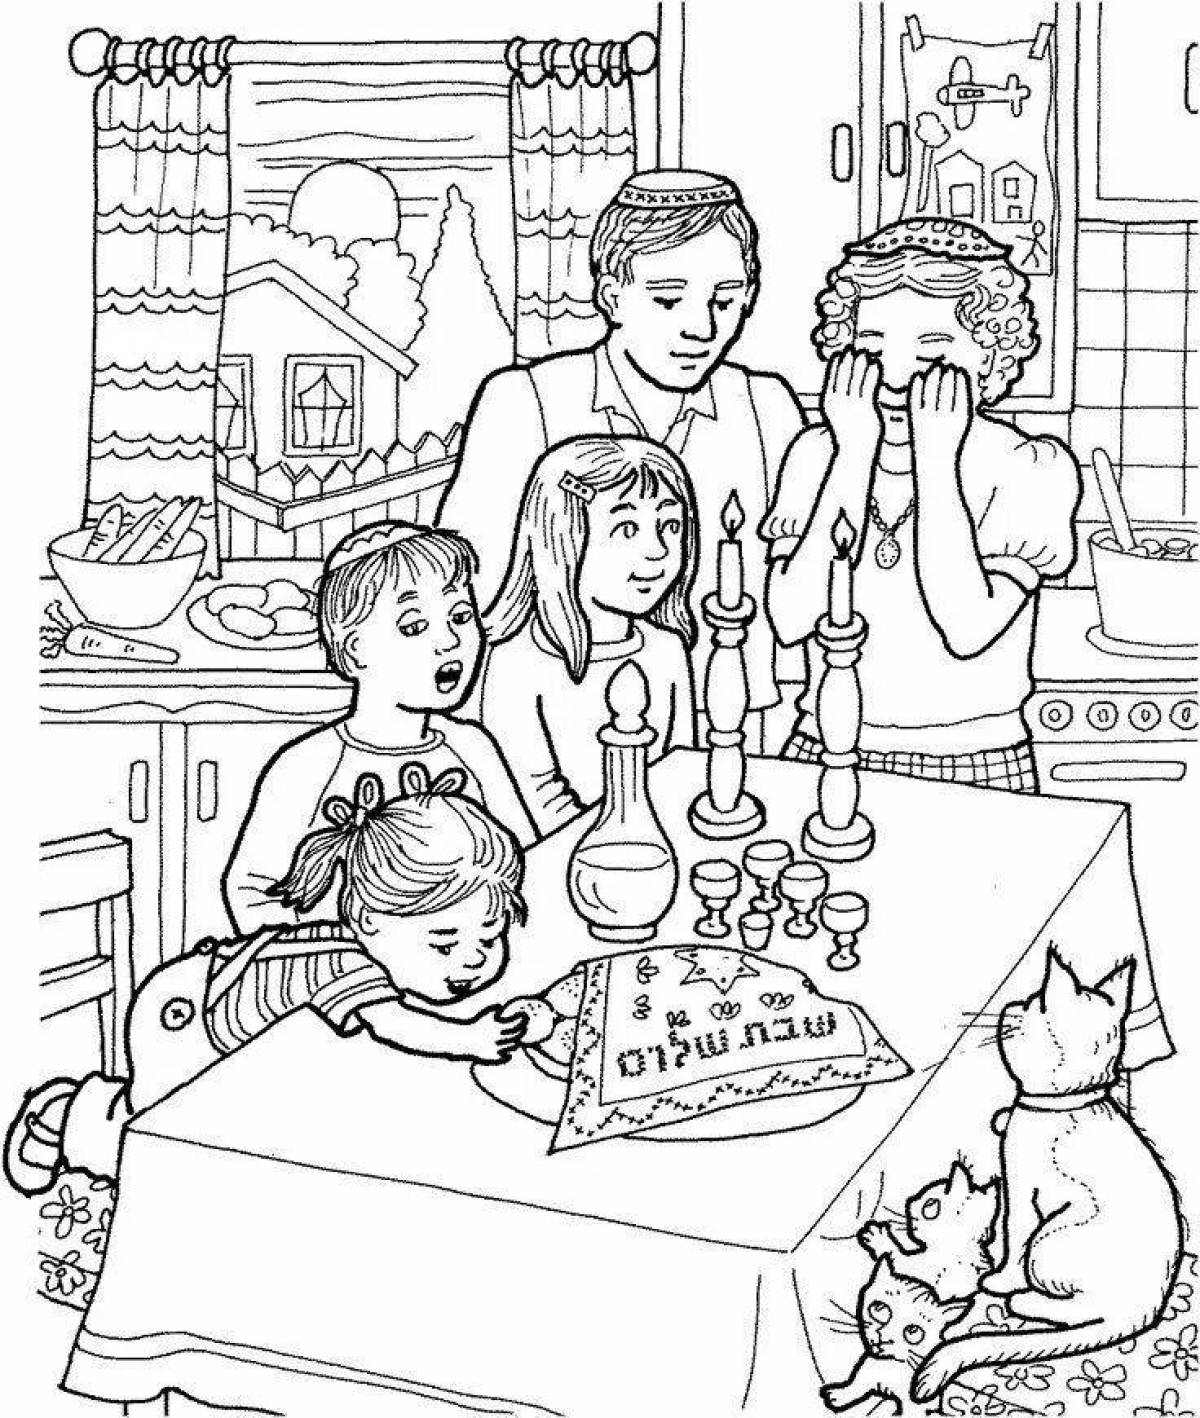 Significant coloring pages of family traditions